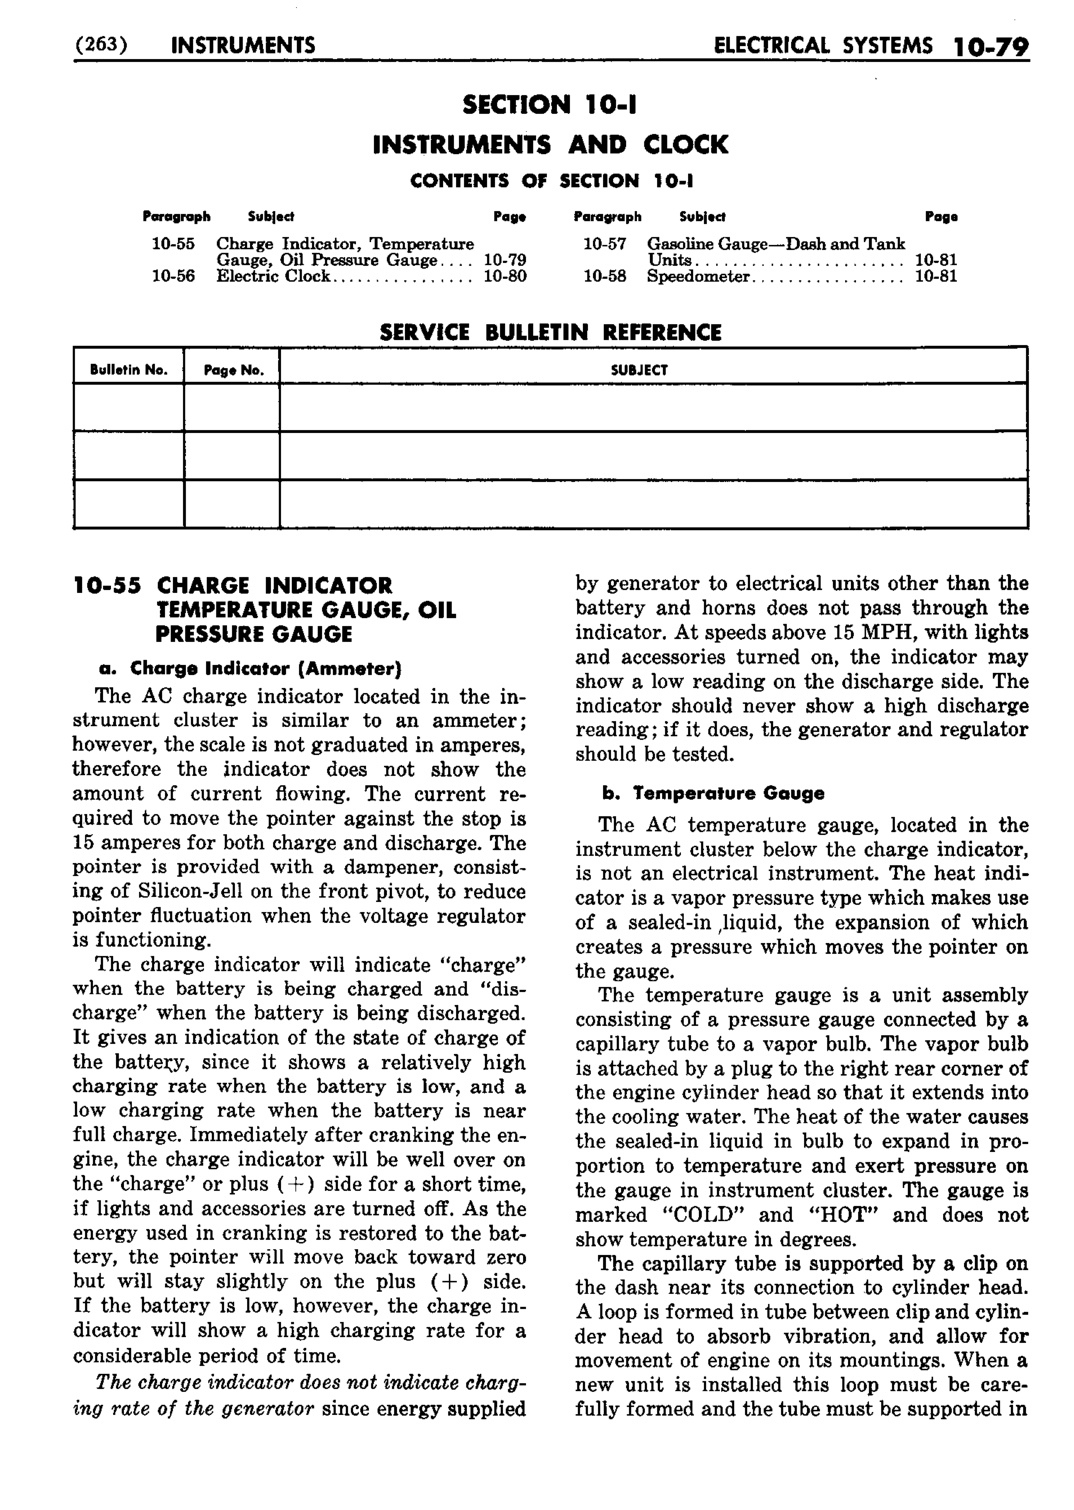 n_11 1953 Buick Shop Manual - Electrical Systems-080-080.jpg